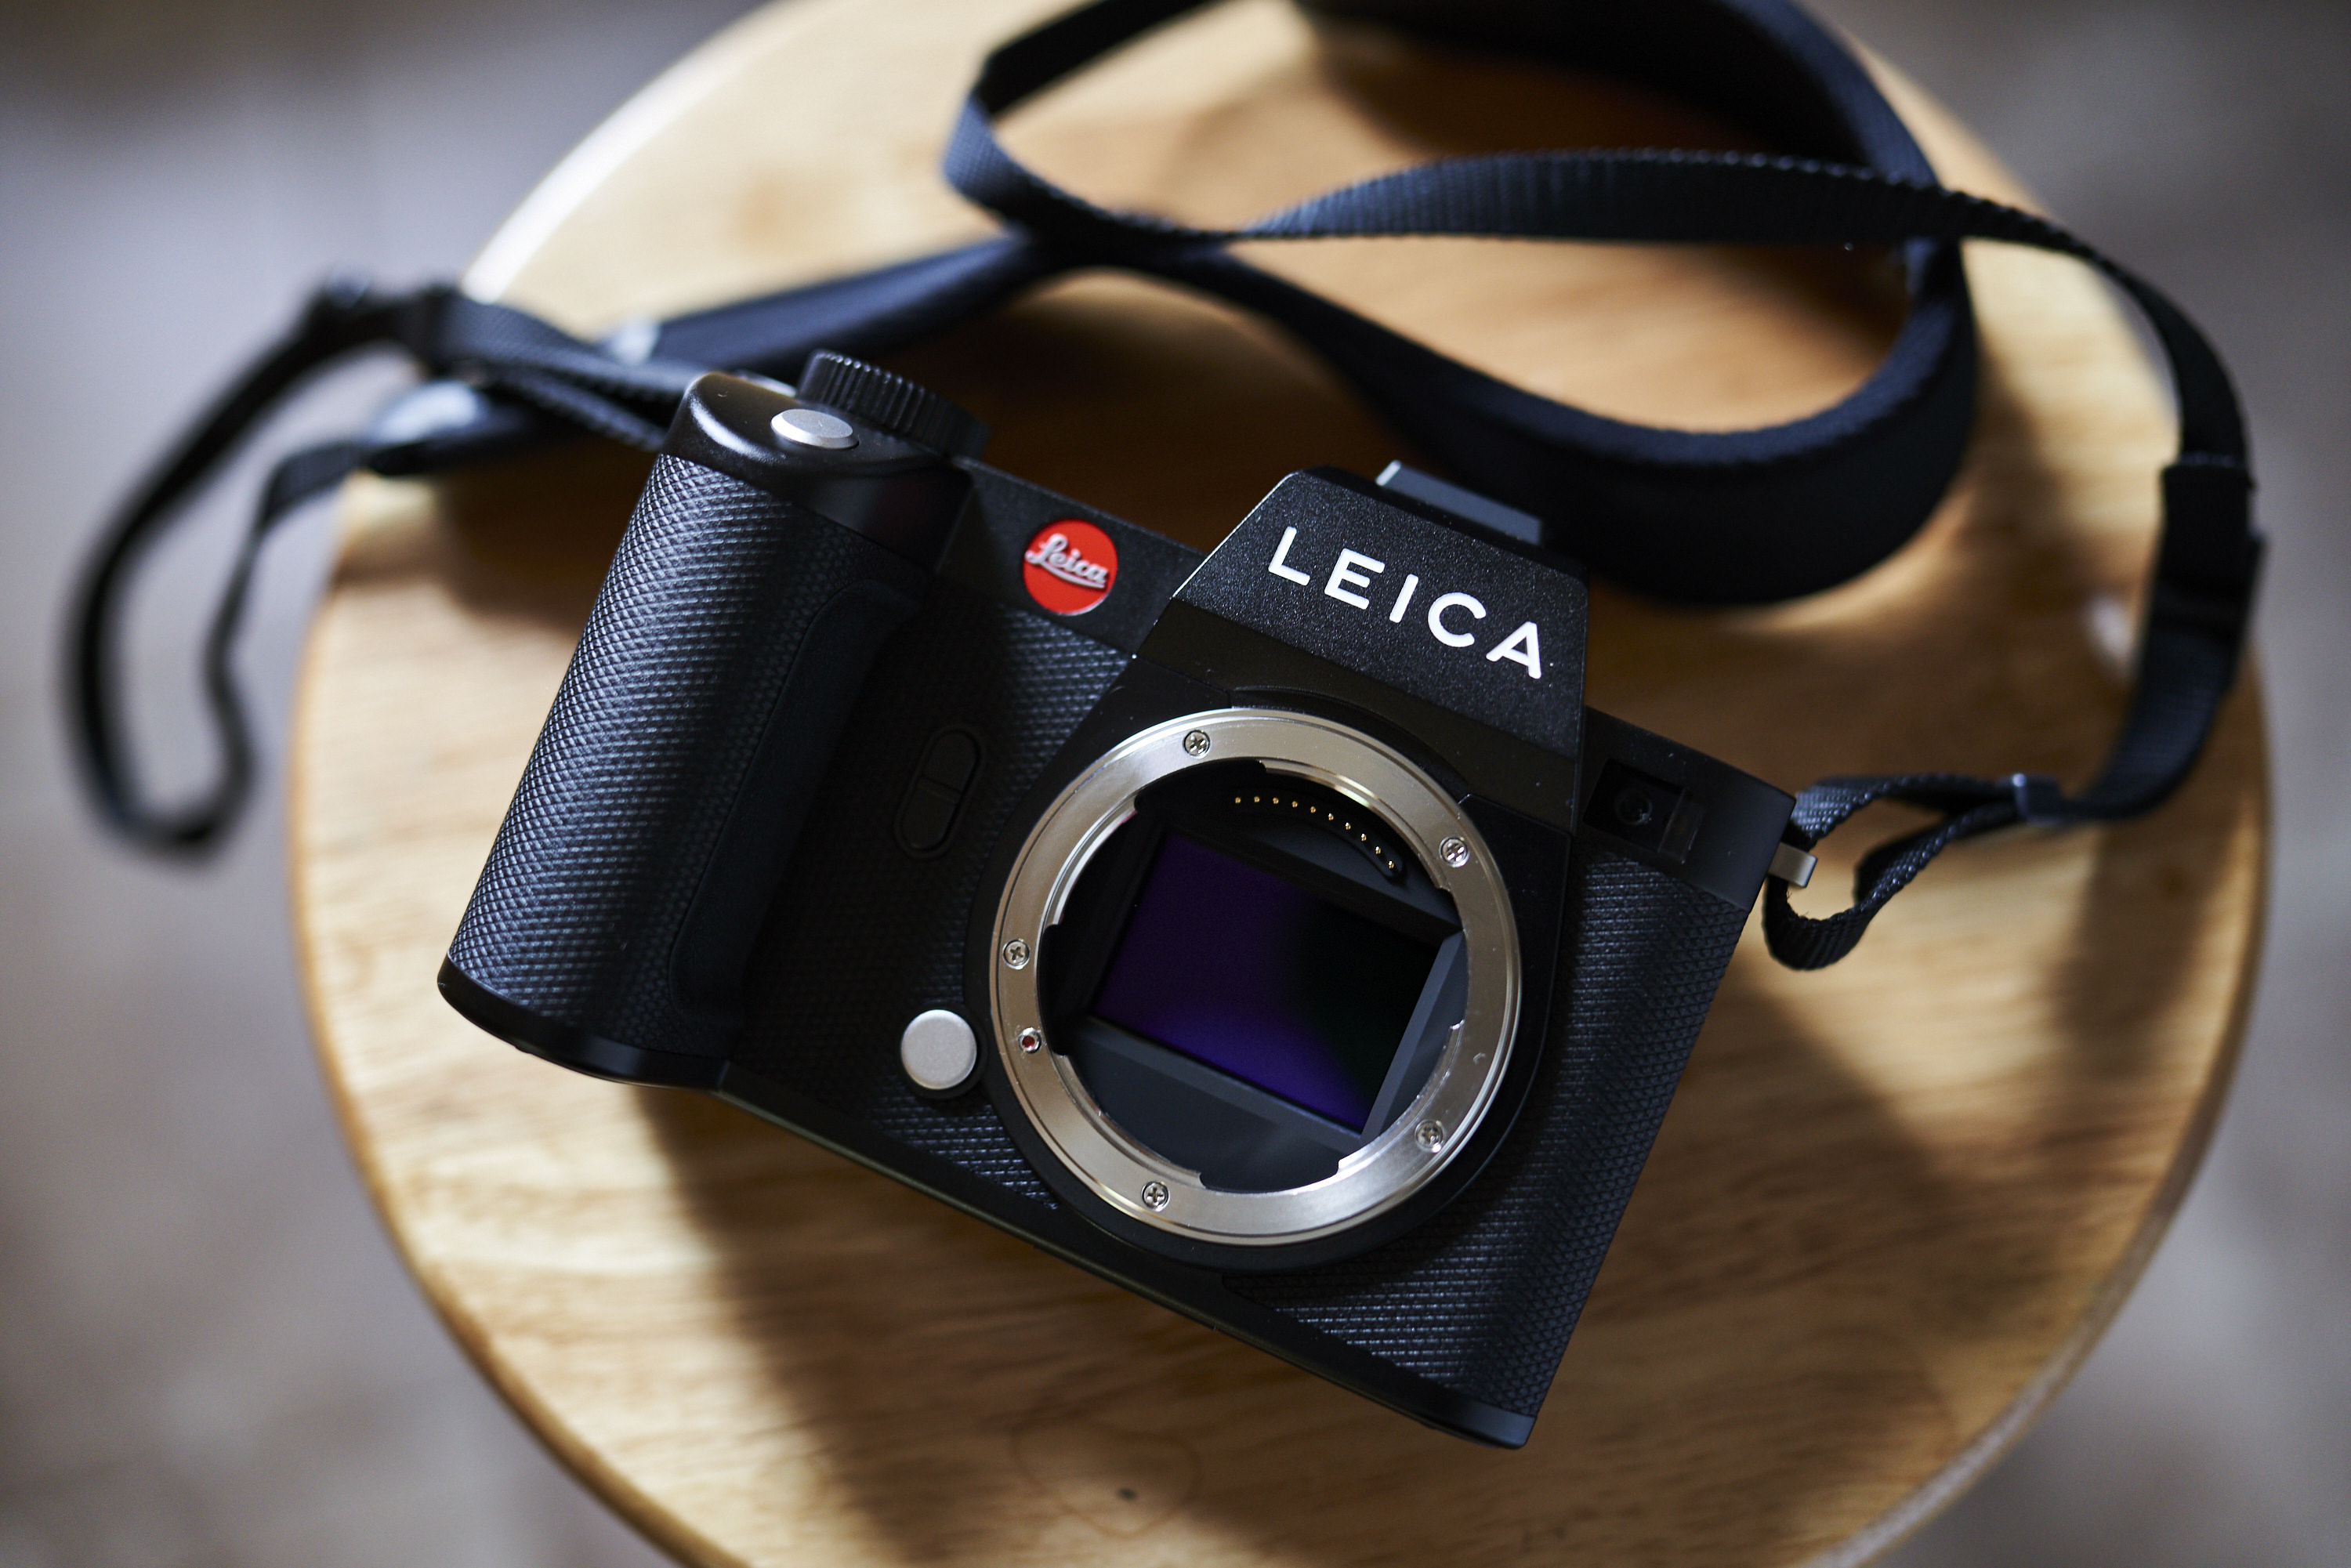 Chris Gampat The Phoblographer Leica SL2 product images 1.81-80s800 1